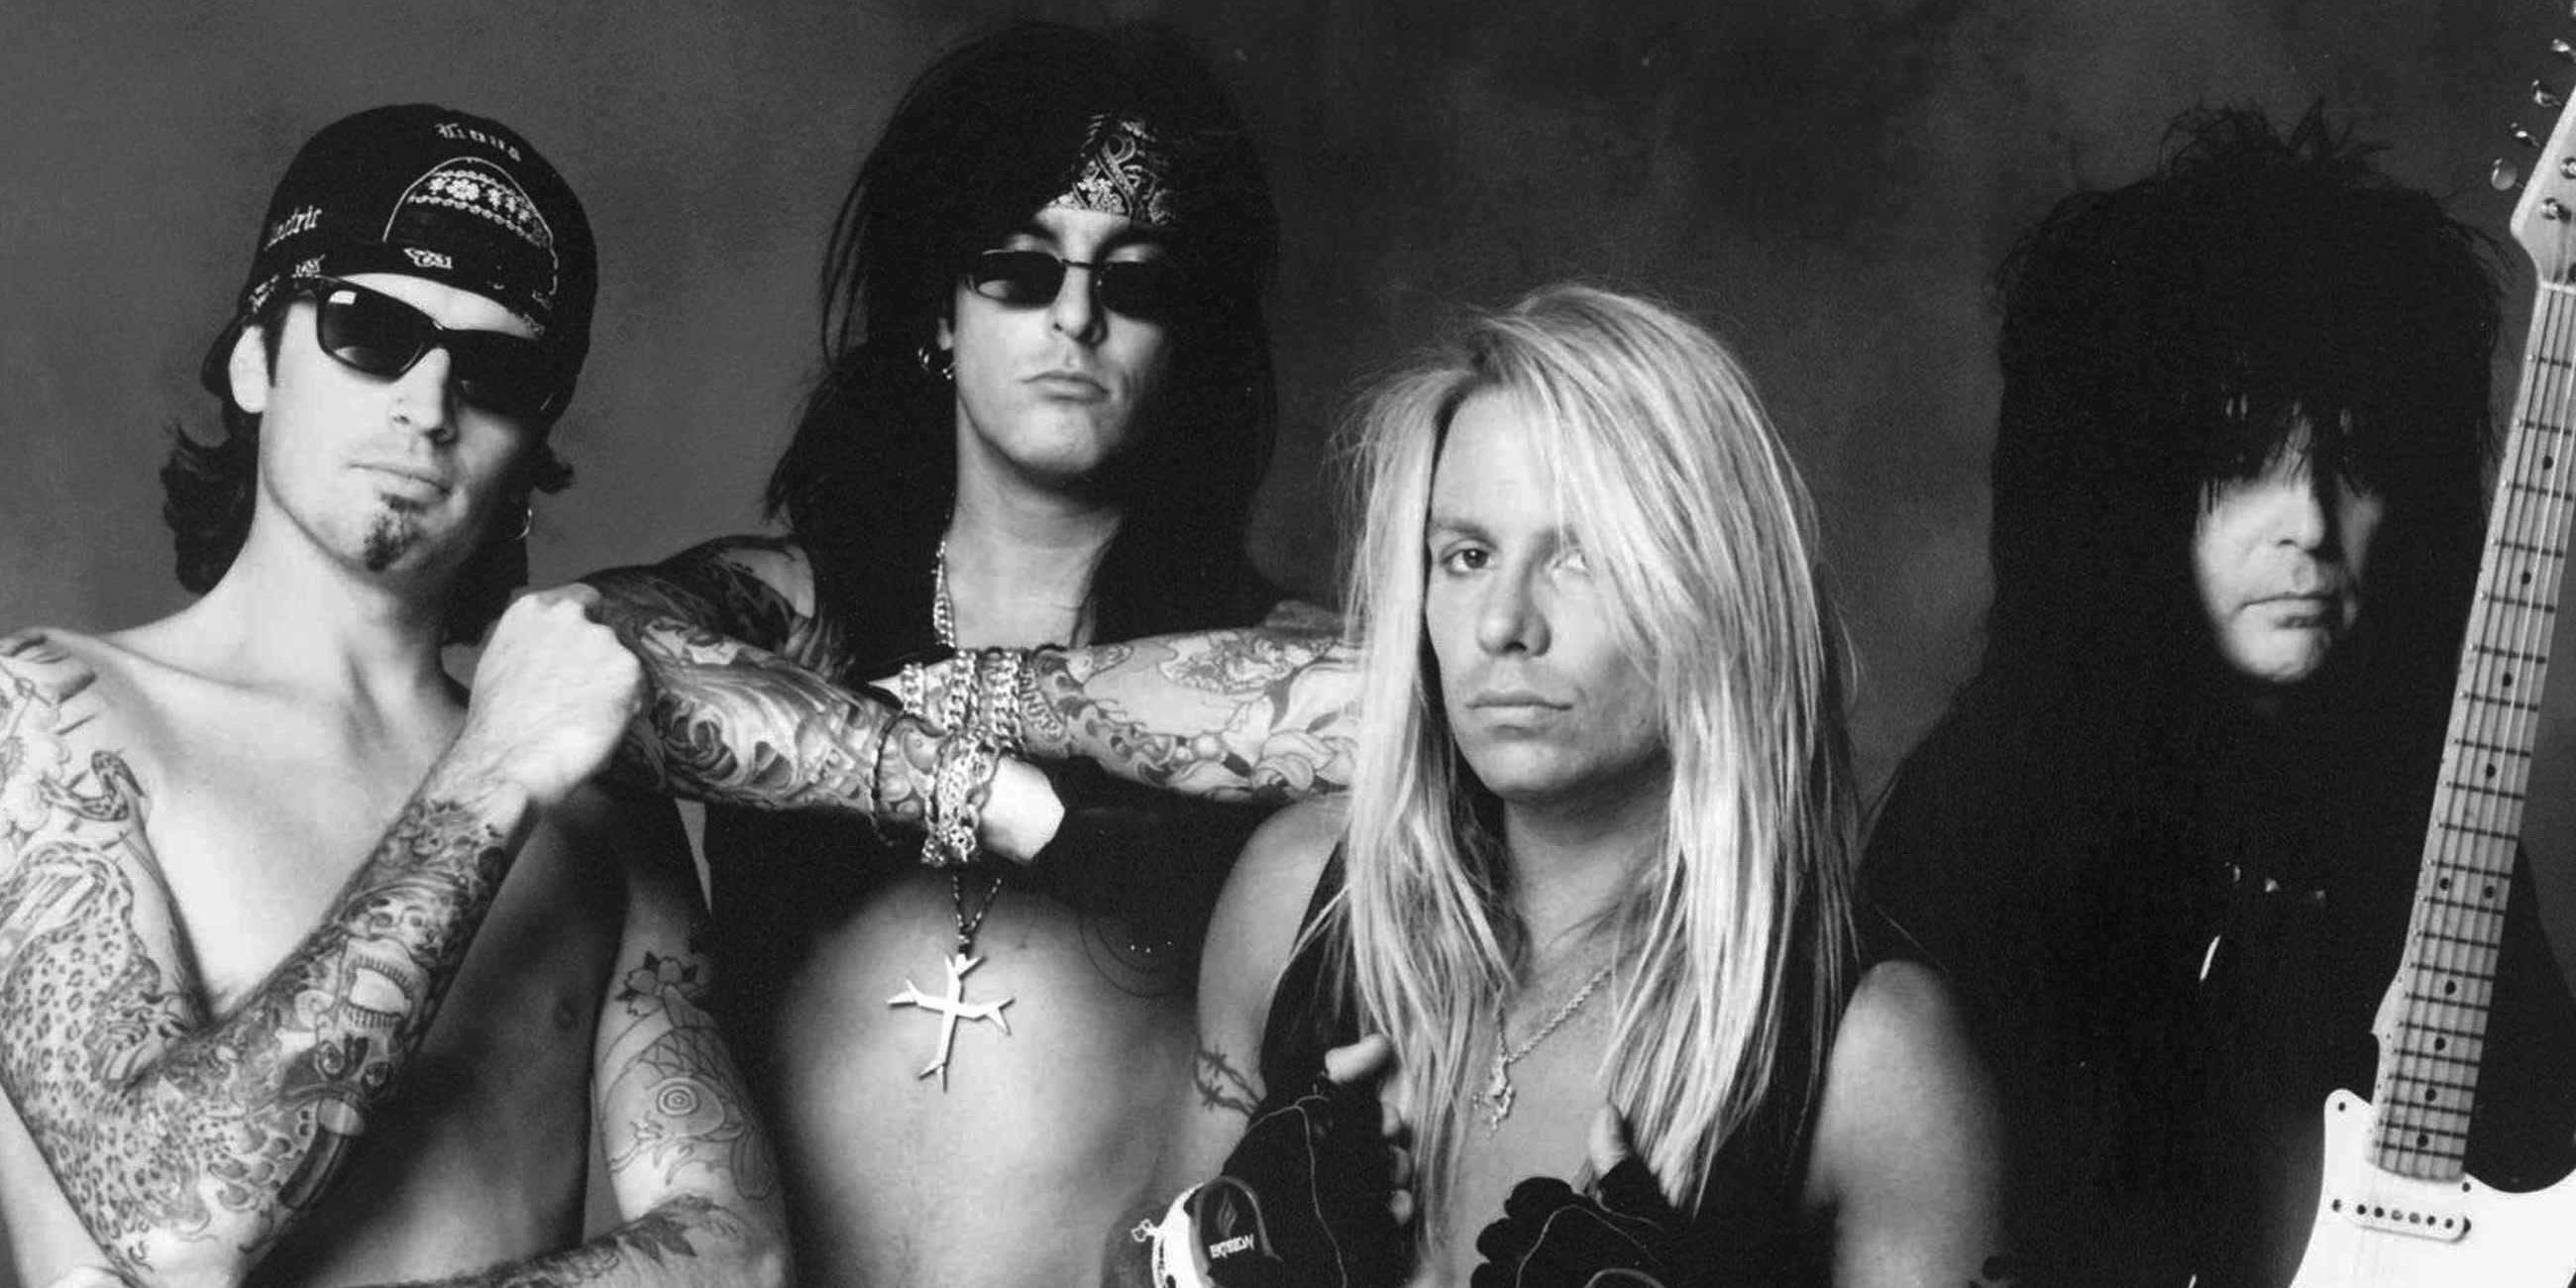 The band Motley Crue posing in a black and white photo